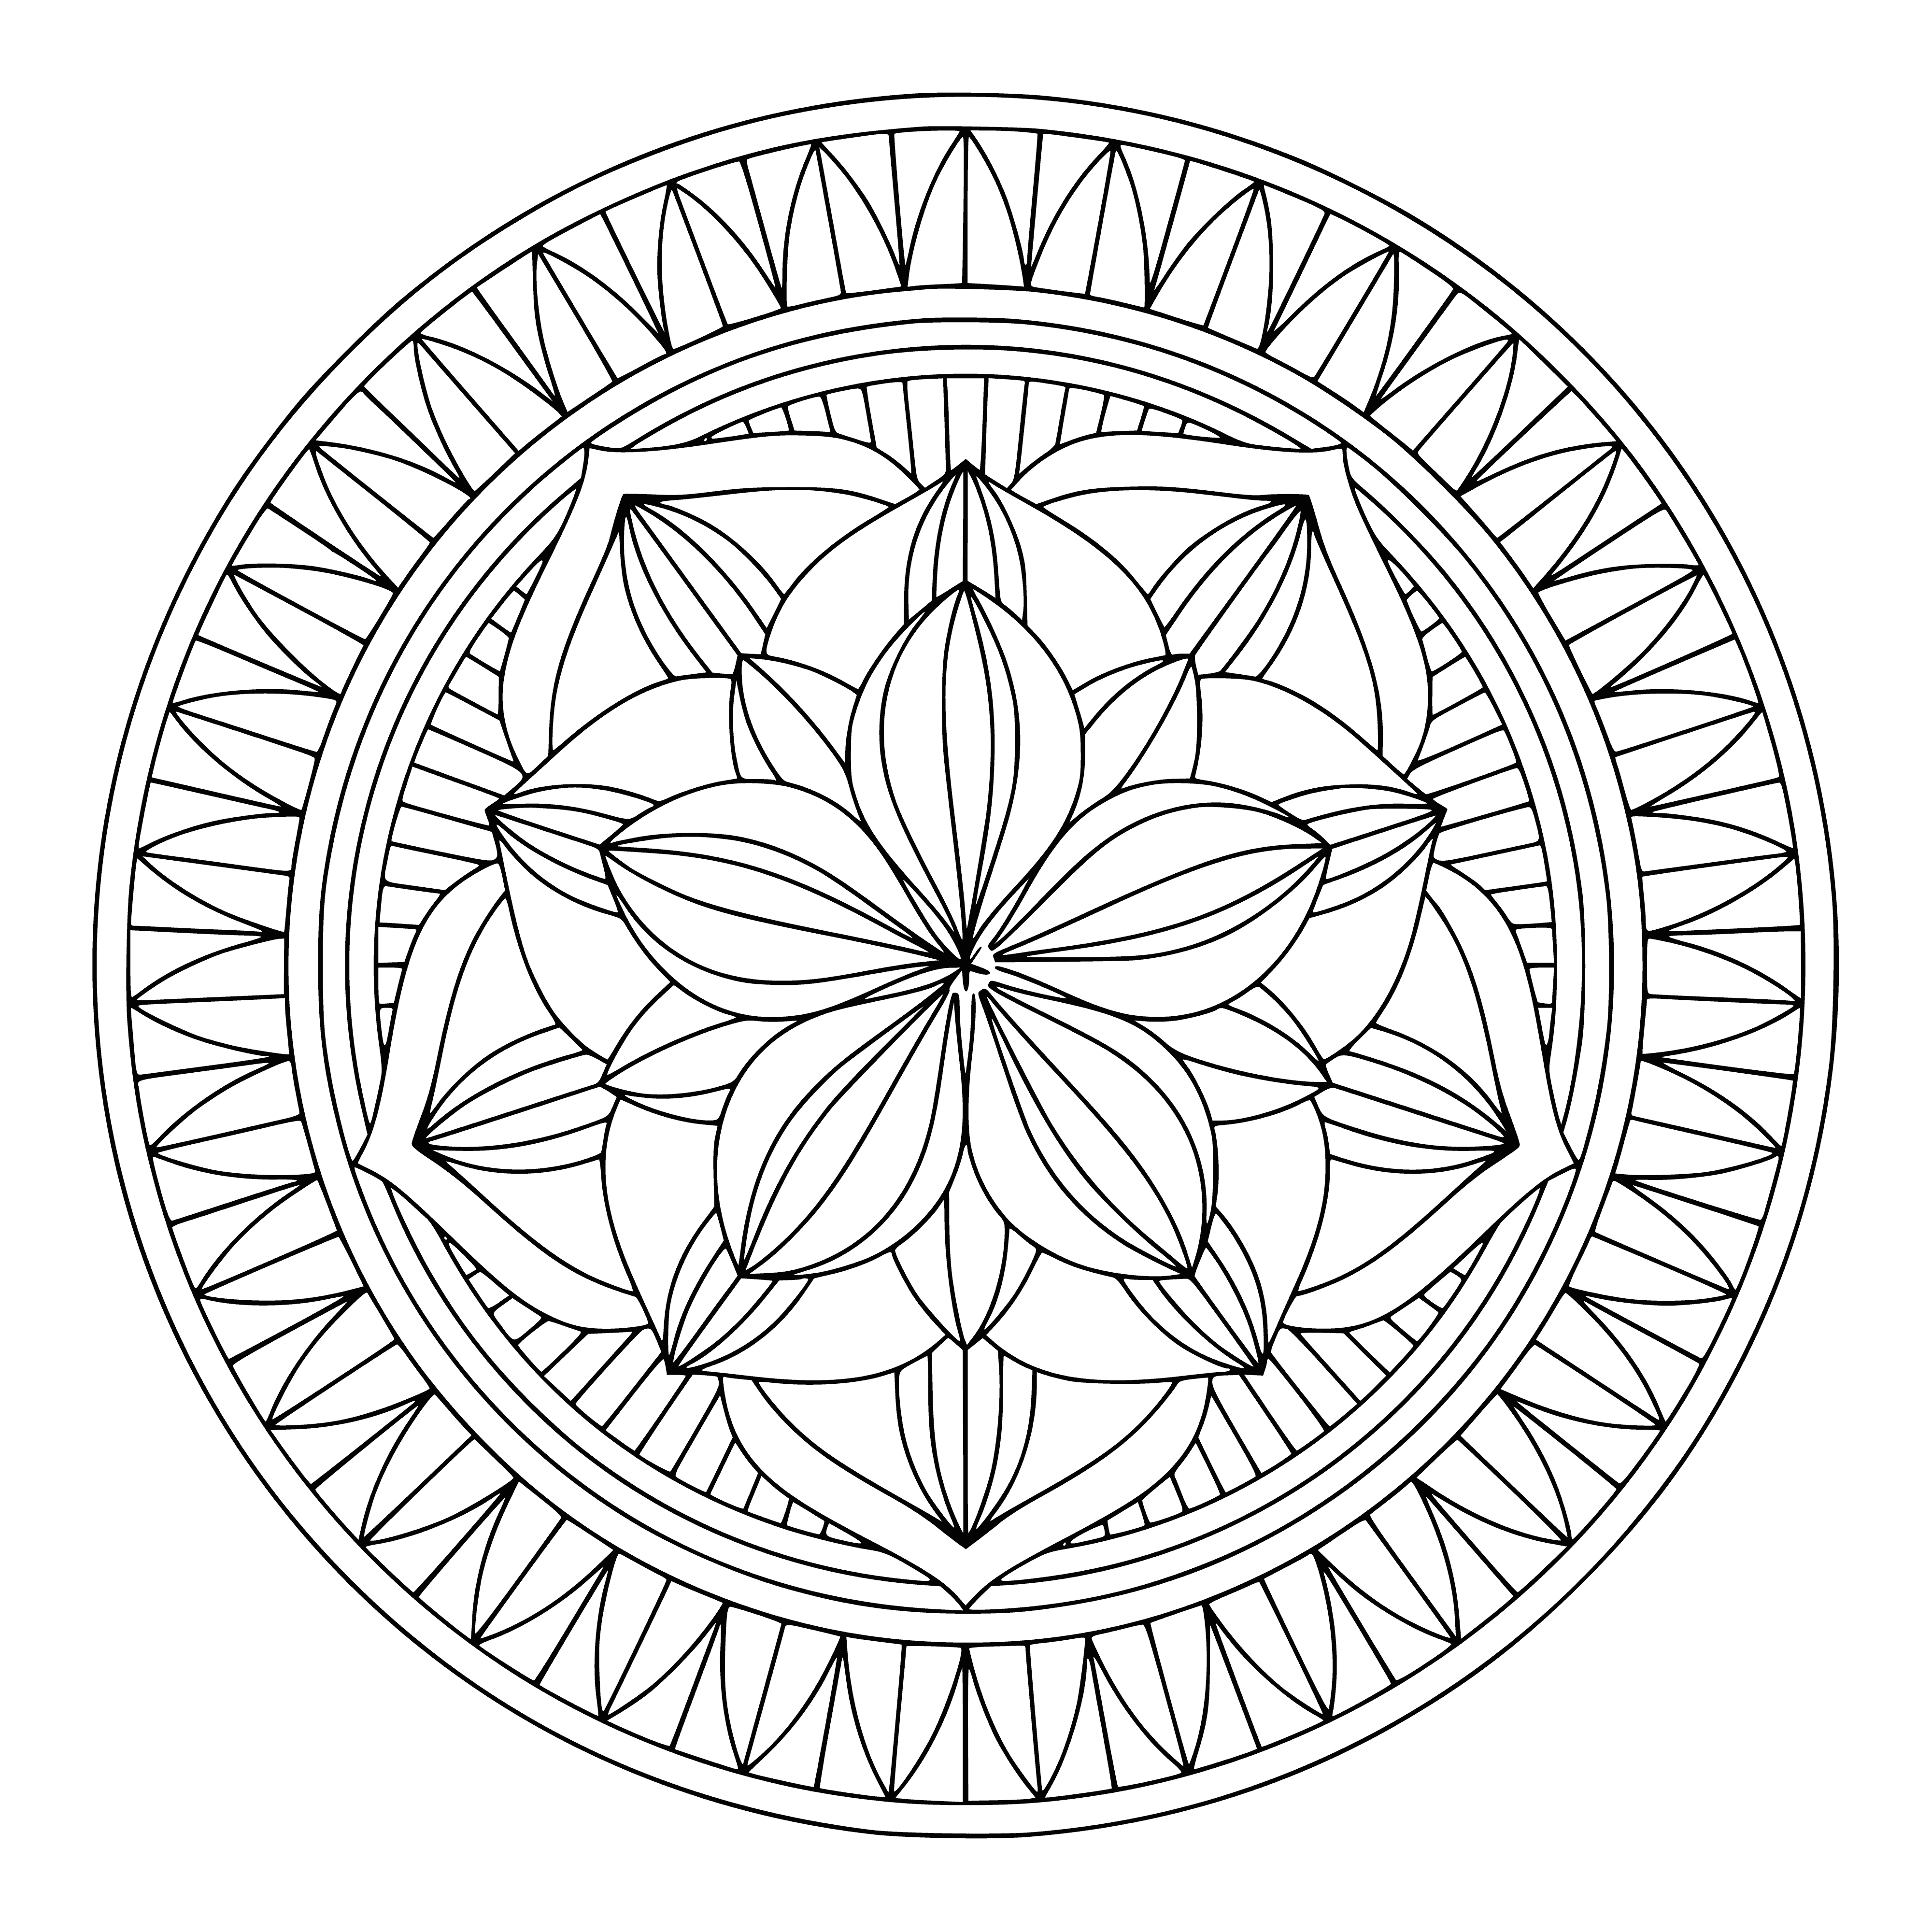 coloring page: A colorful flower mandala design orbits around a center point; intricate and fun to color! #art #design